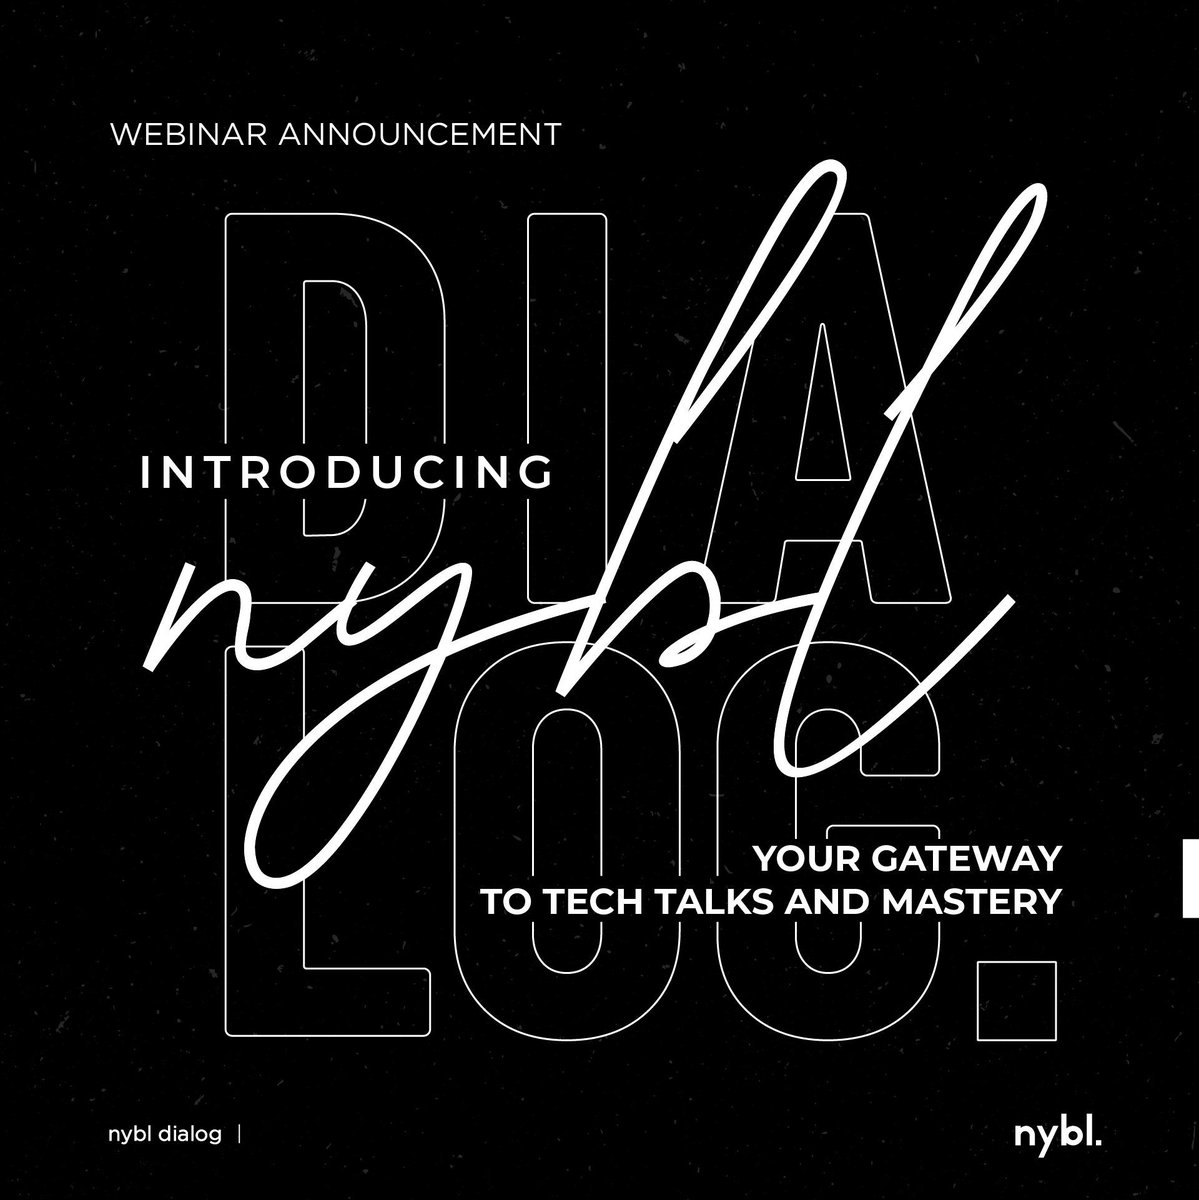 EXCITING NEWS! 📢 Presenting nybl dialog – a knowledge-sharing ecosystem that transcends traditional boundaries, where nybl innovators share insights, showcase the innovative work they are doing at nybl, and foster engagement. Stay tuned for more details! #AI #Webinar #Tech